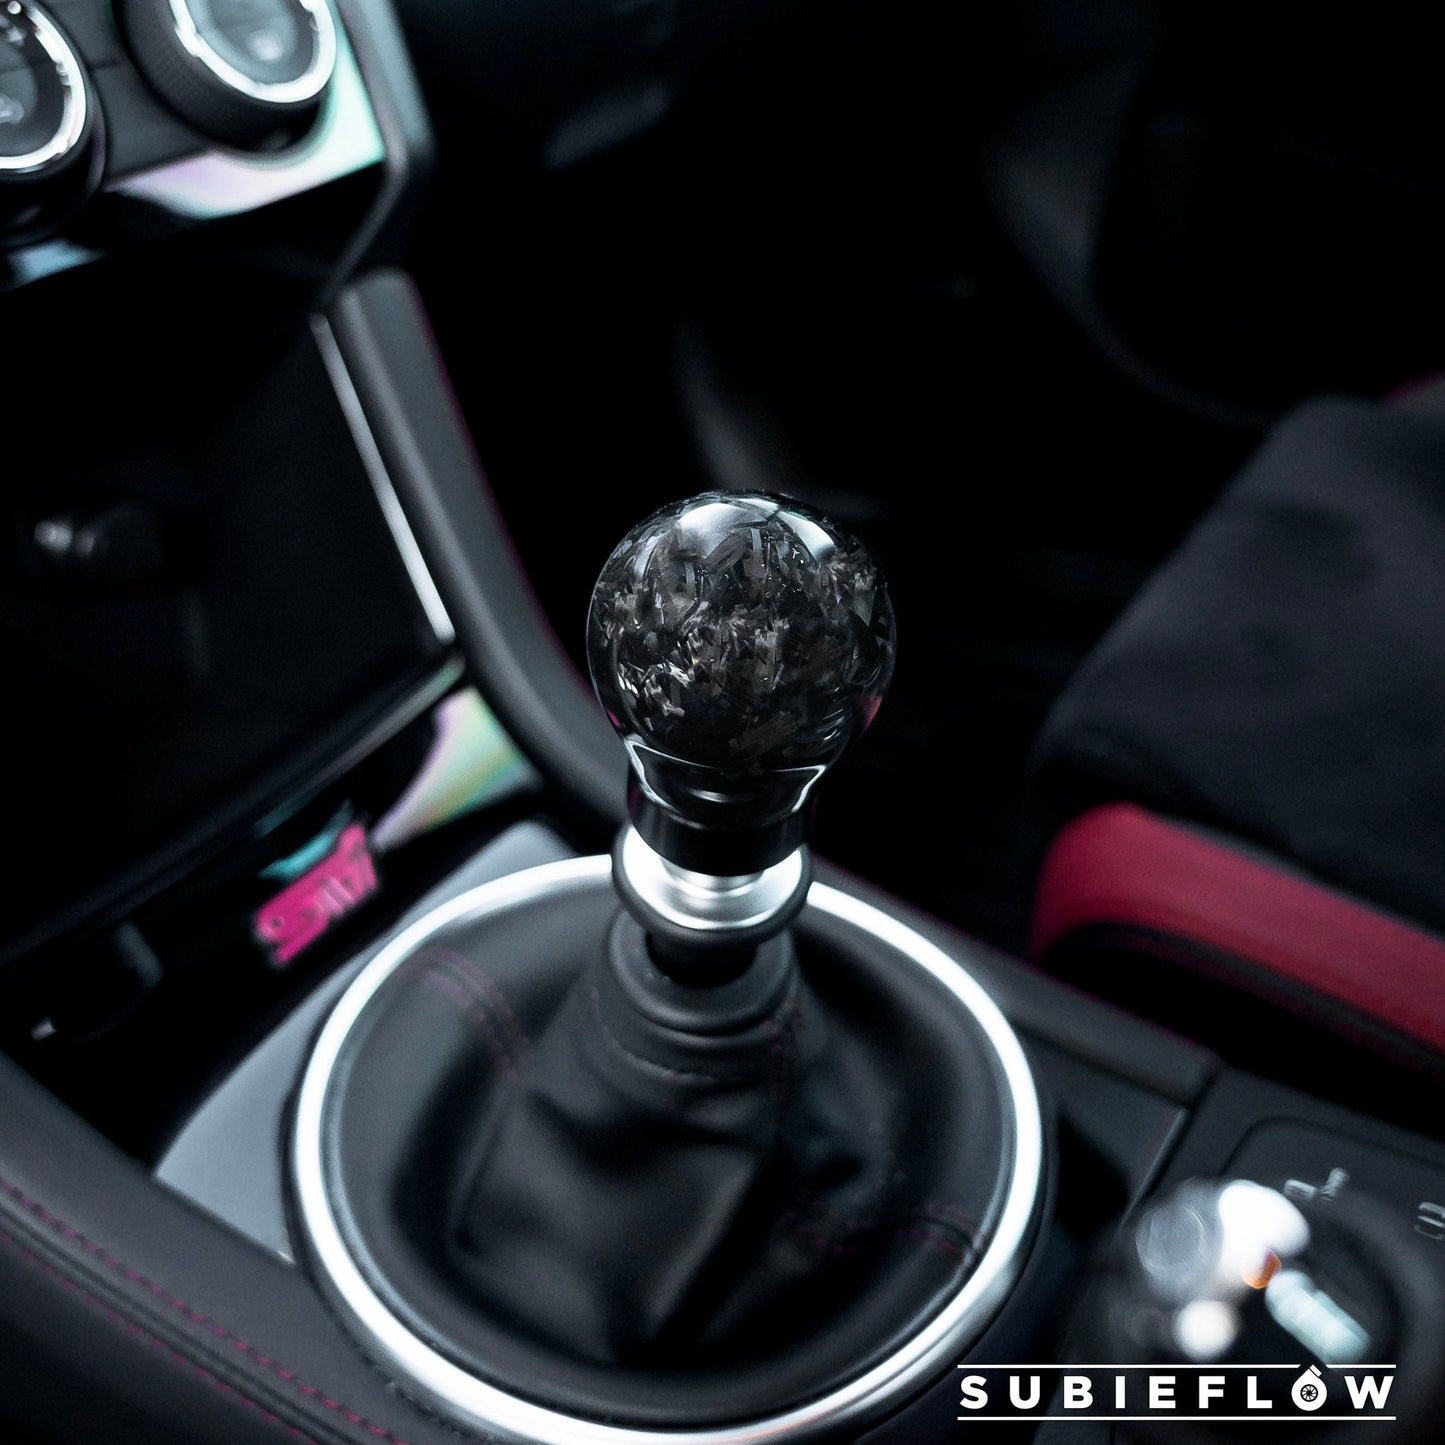 Weighted Forged Carbon Fiber Shift Knob - SubieFlow